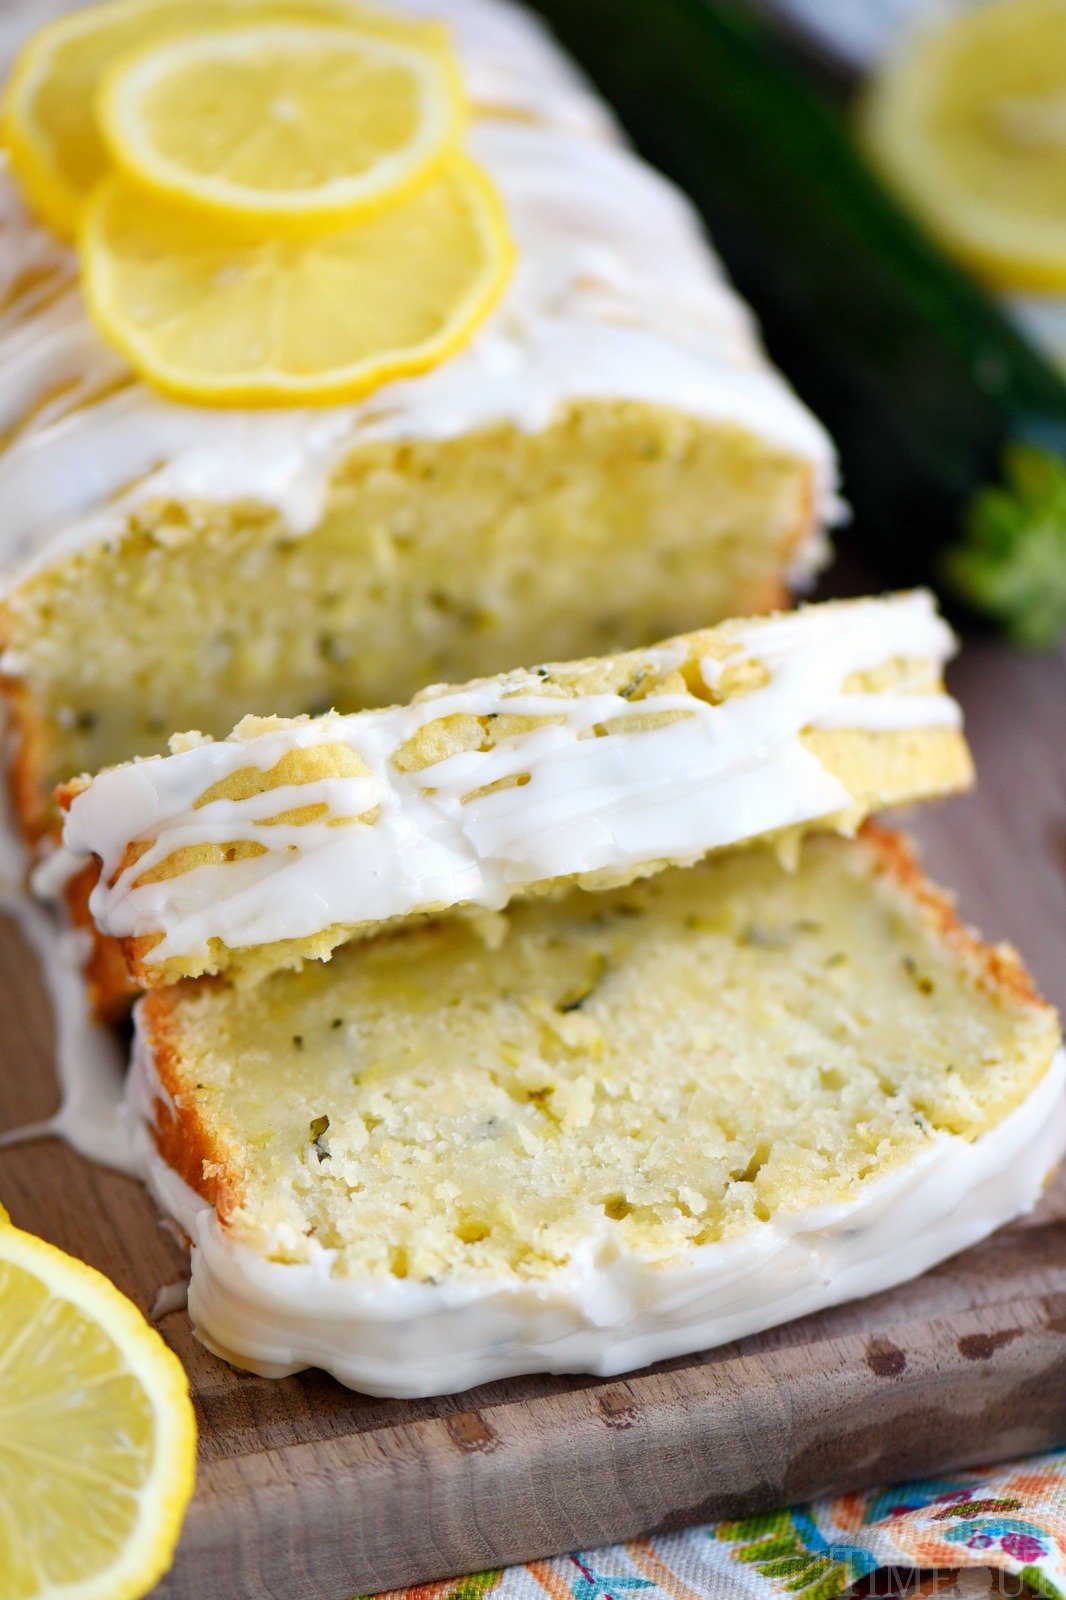 This Lemon Zucchini Cake is definitive proof that lemon and zucchini belong together! Beautifully moist and undeniably delicious, this easy cake is topped with a lemon glaze that will keep you coming back for one more slice.  An excellent way to use up that zucchini from your garden! // Mom On Timeout